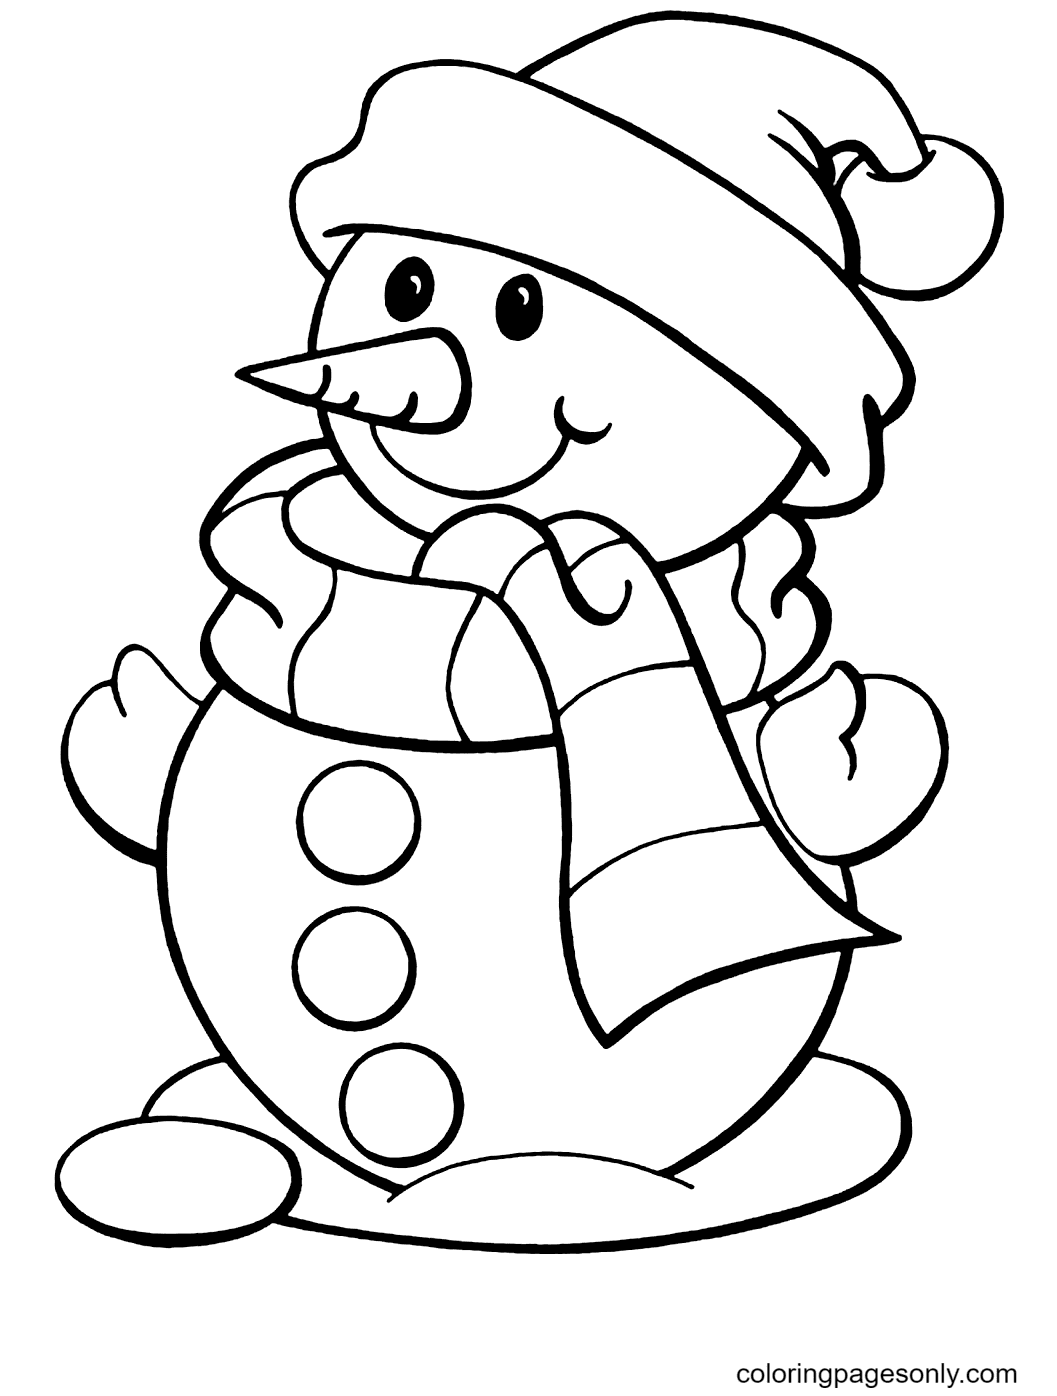 Cute Mr Snowman Coloring Page